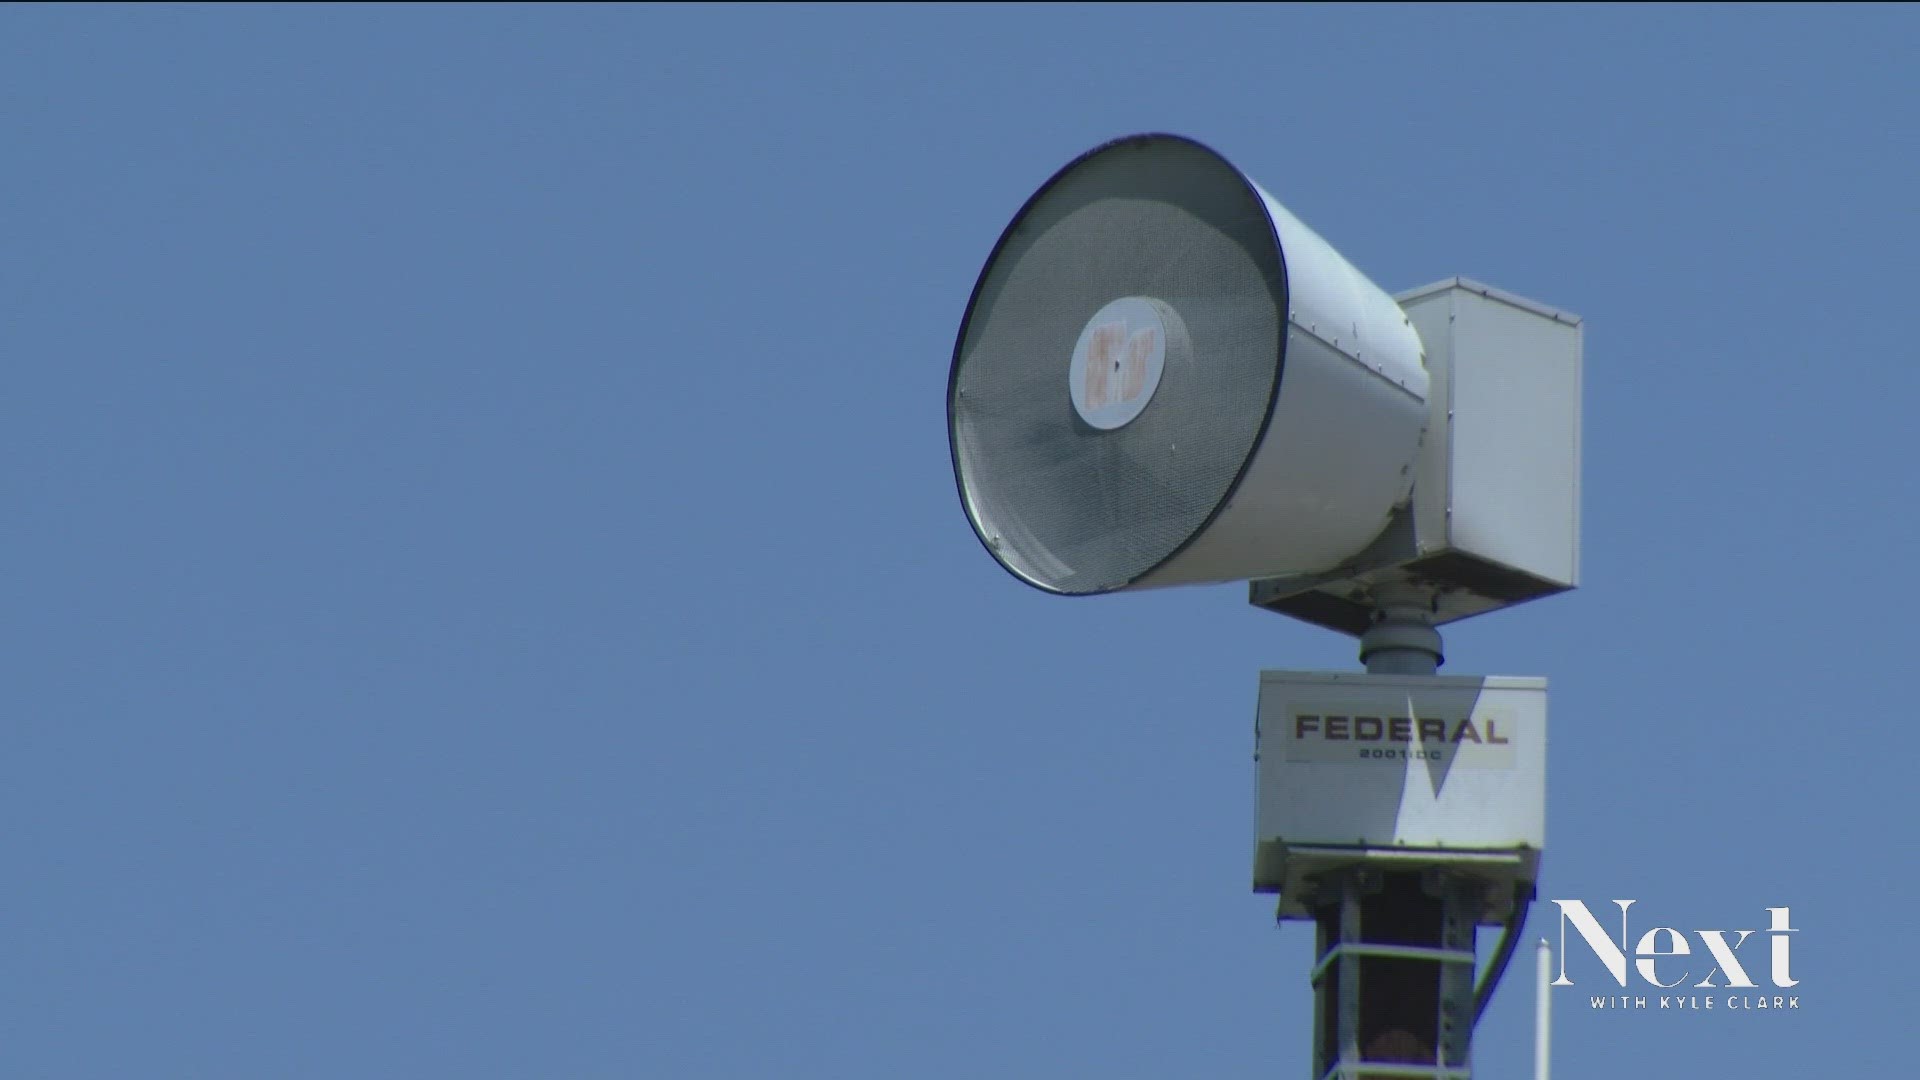 Douglas County, like other places, does not have tornado sirens.